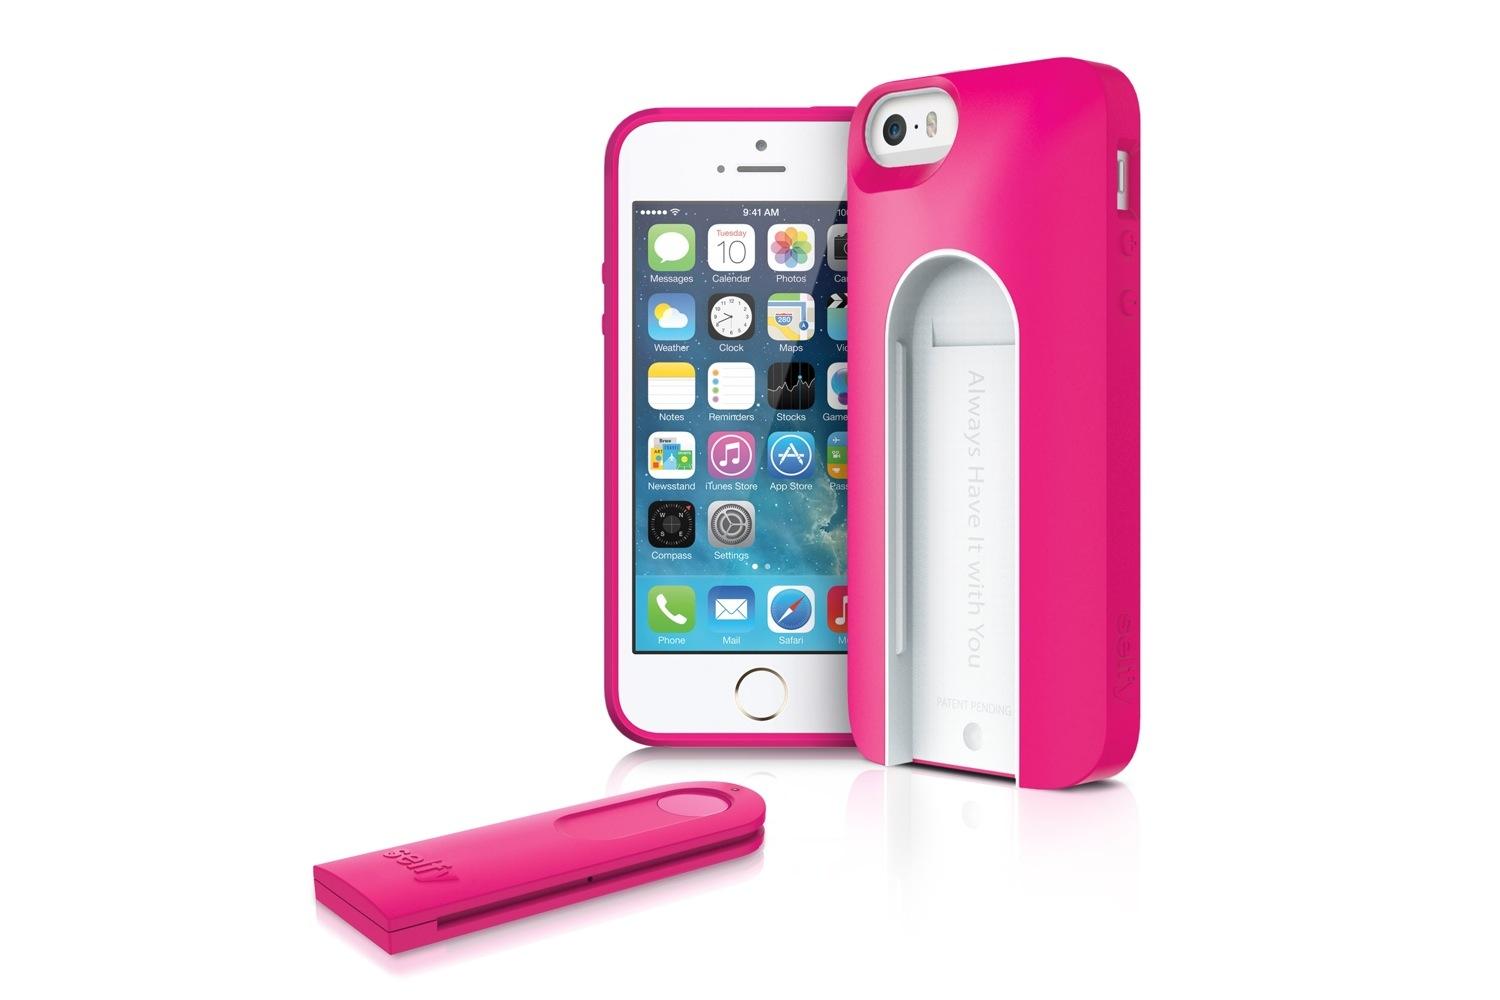 iluv smartphone case with built in remote shutter designed for the selfie obsessed iphone 5s pink